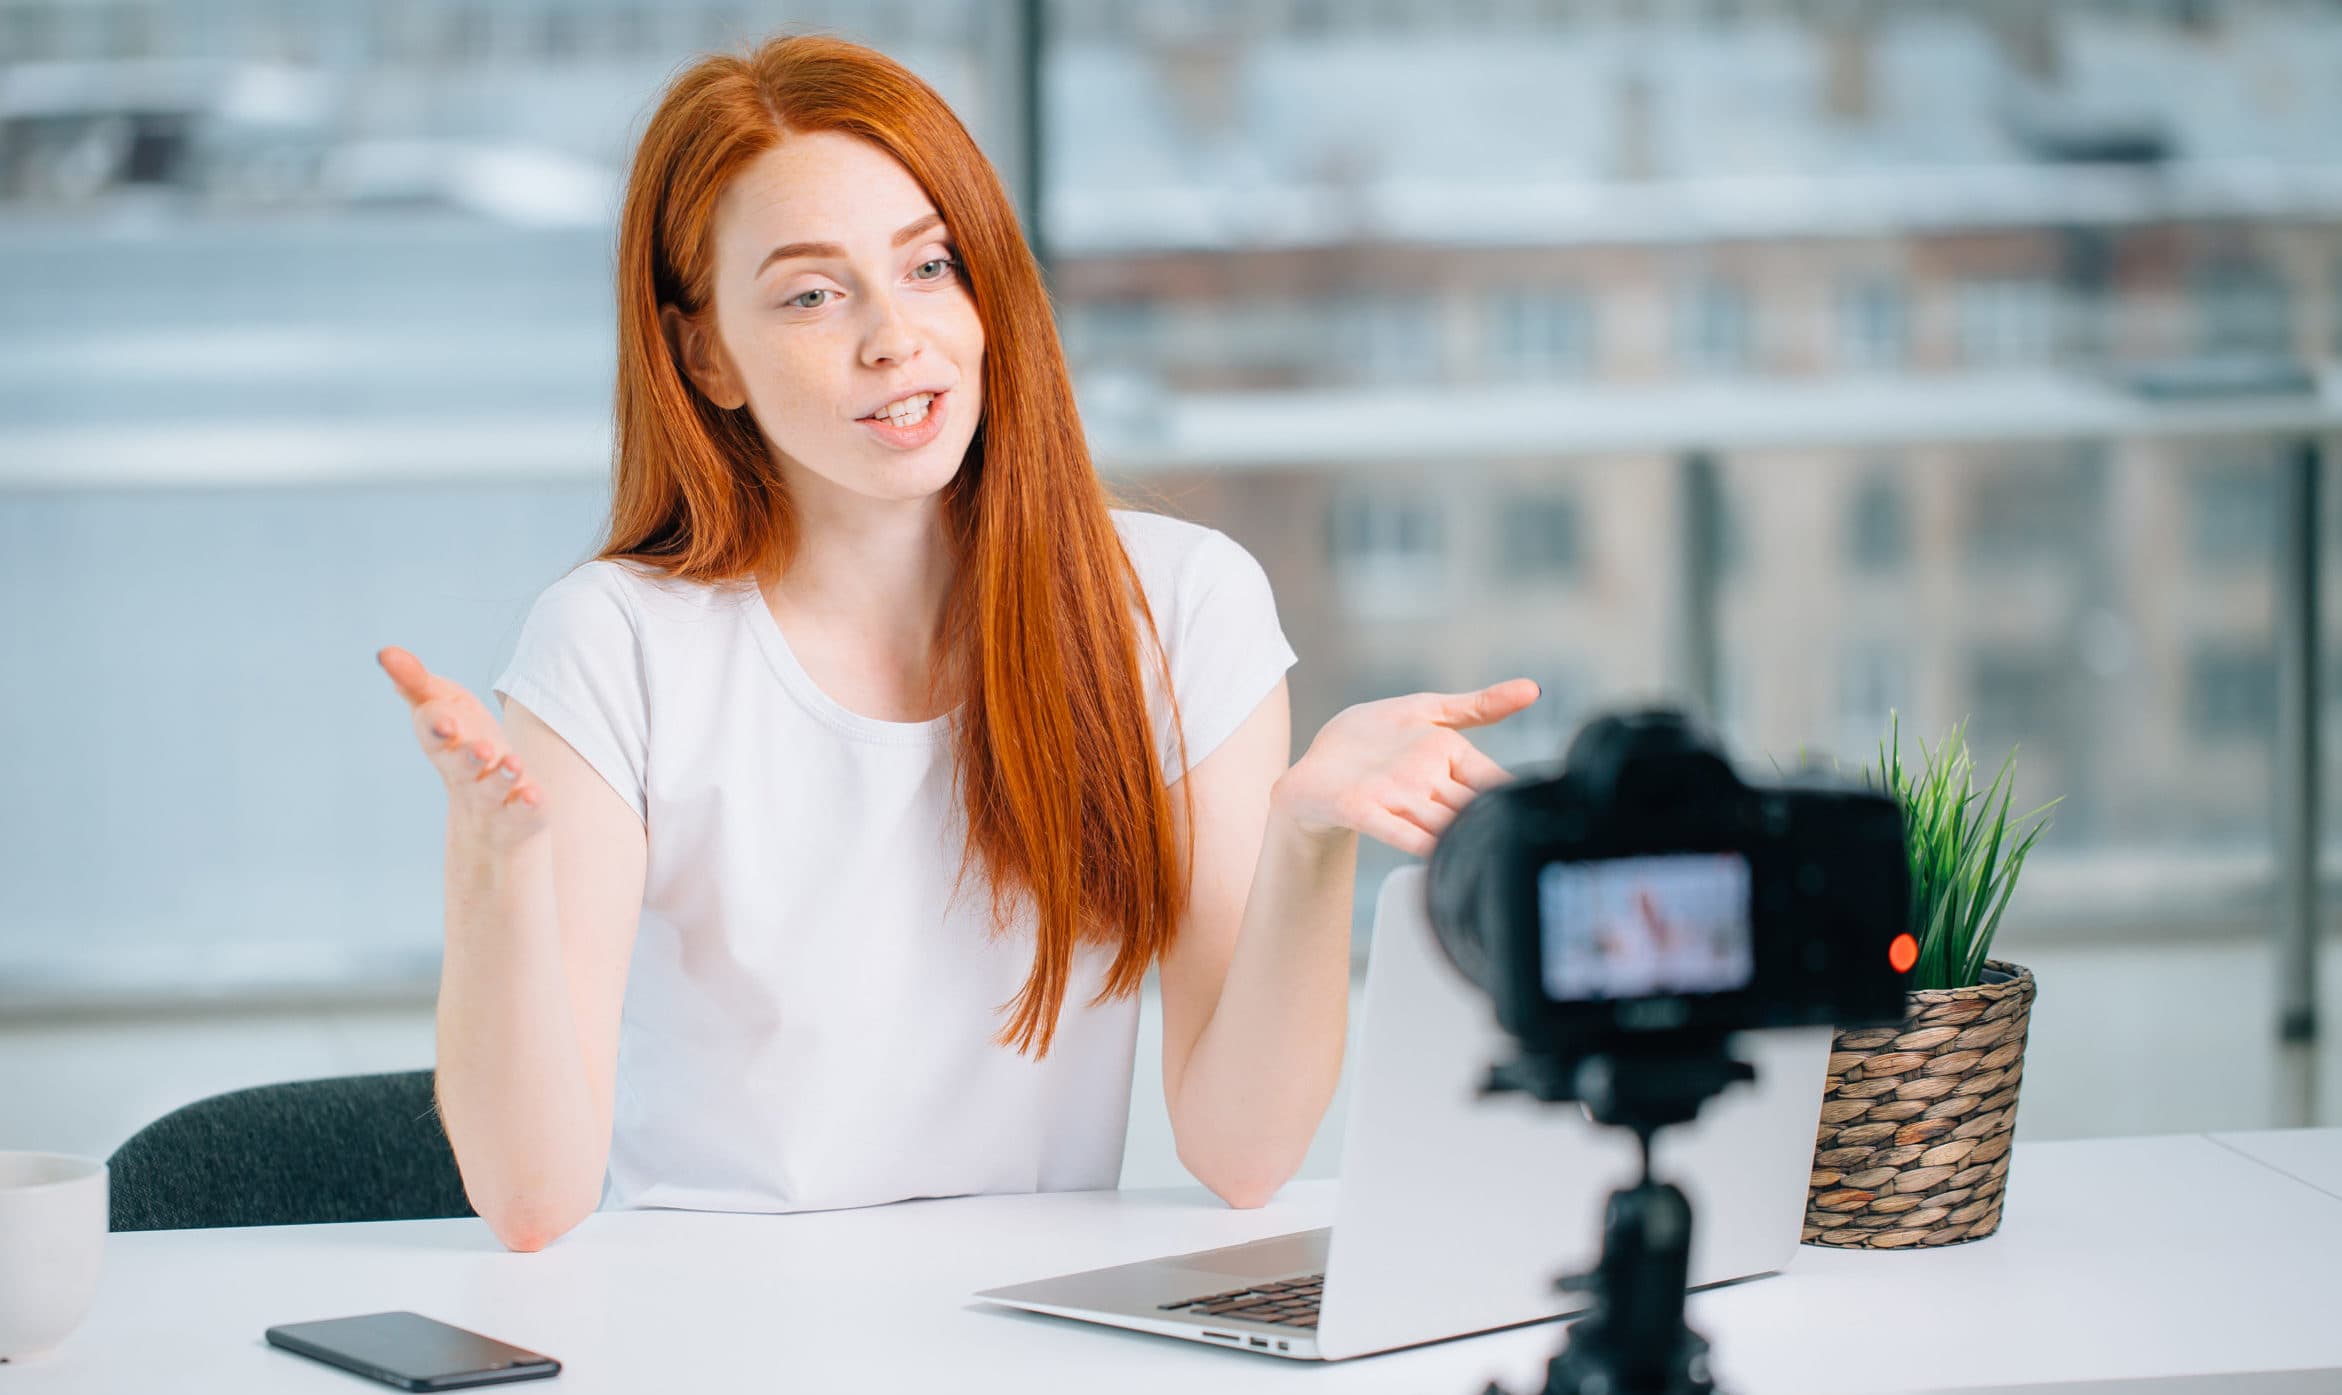 Female Real Estate Agent Recording Video on New Technology